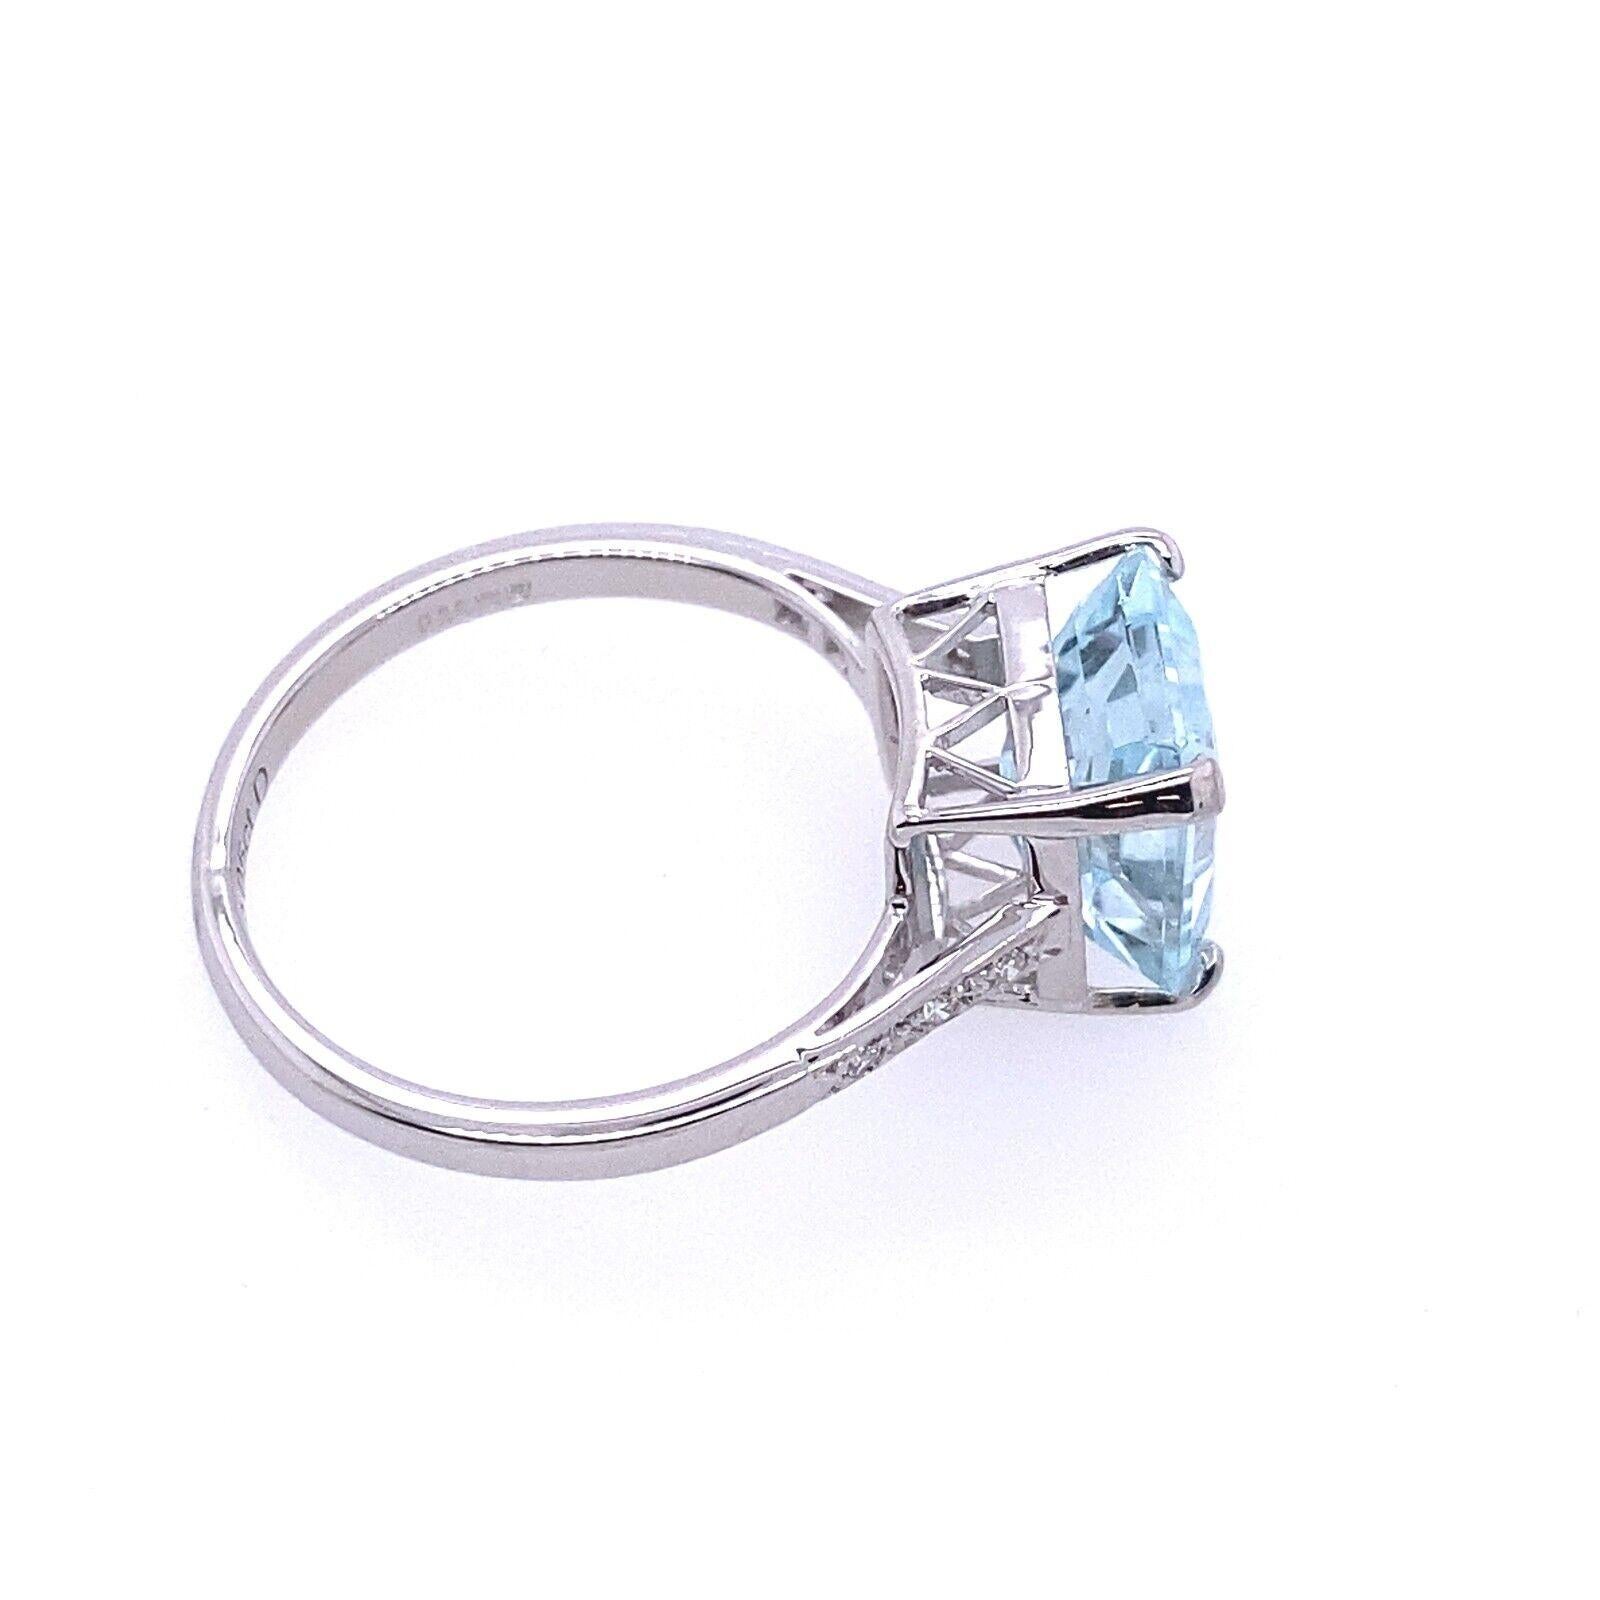 2.95ct Emerald Cut Aquamarine Set in 18ct White Gold Ring with Diamonds In Excellent Condition For Sale In London, GB